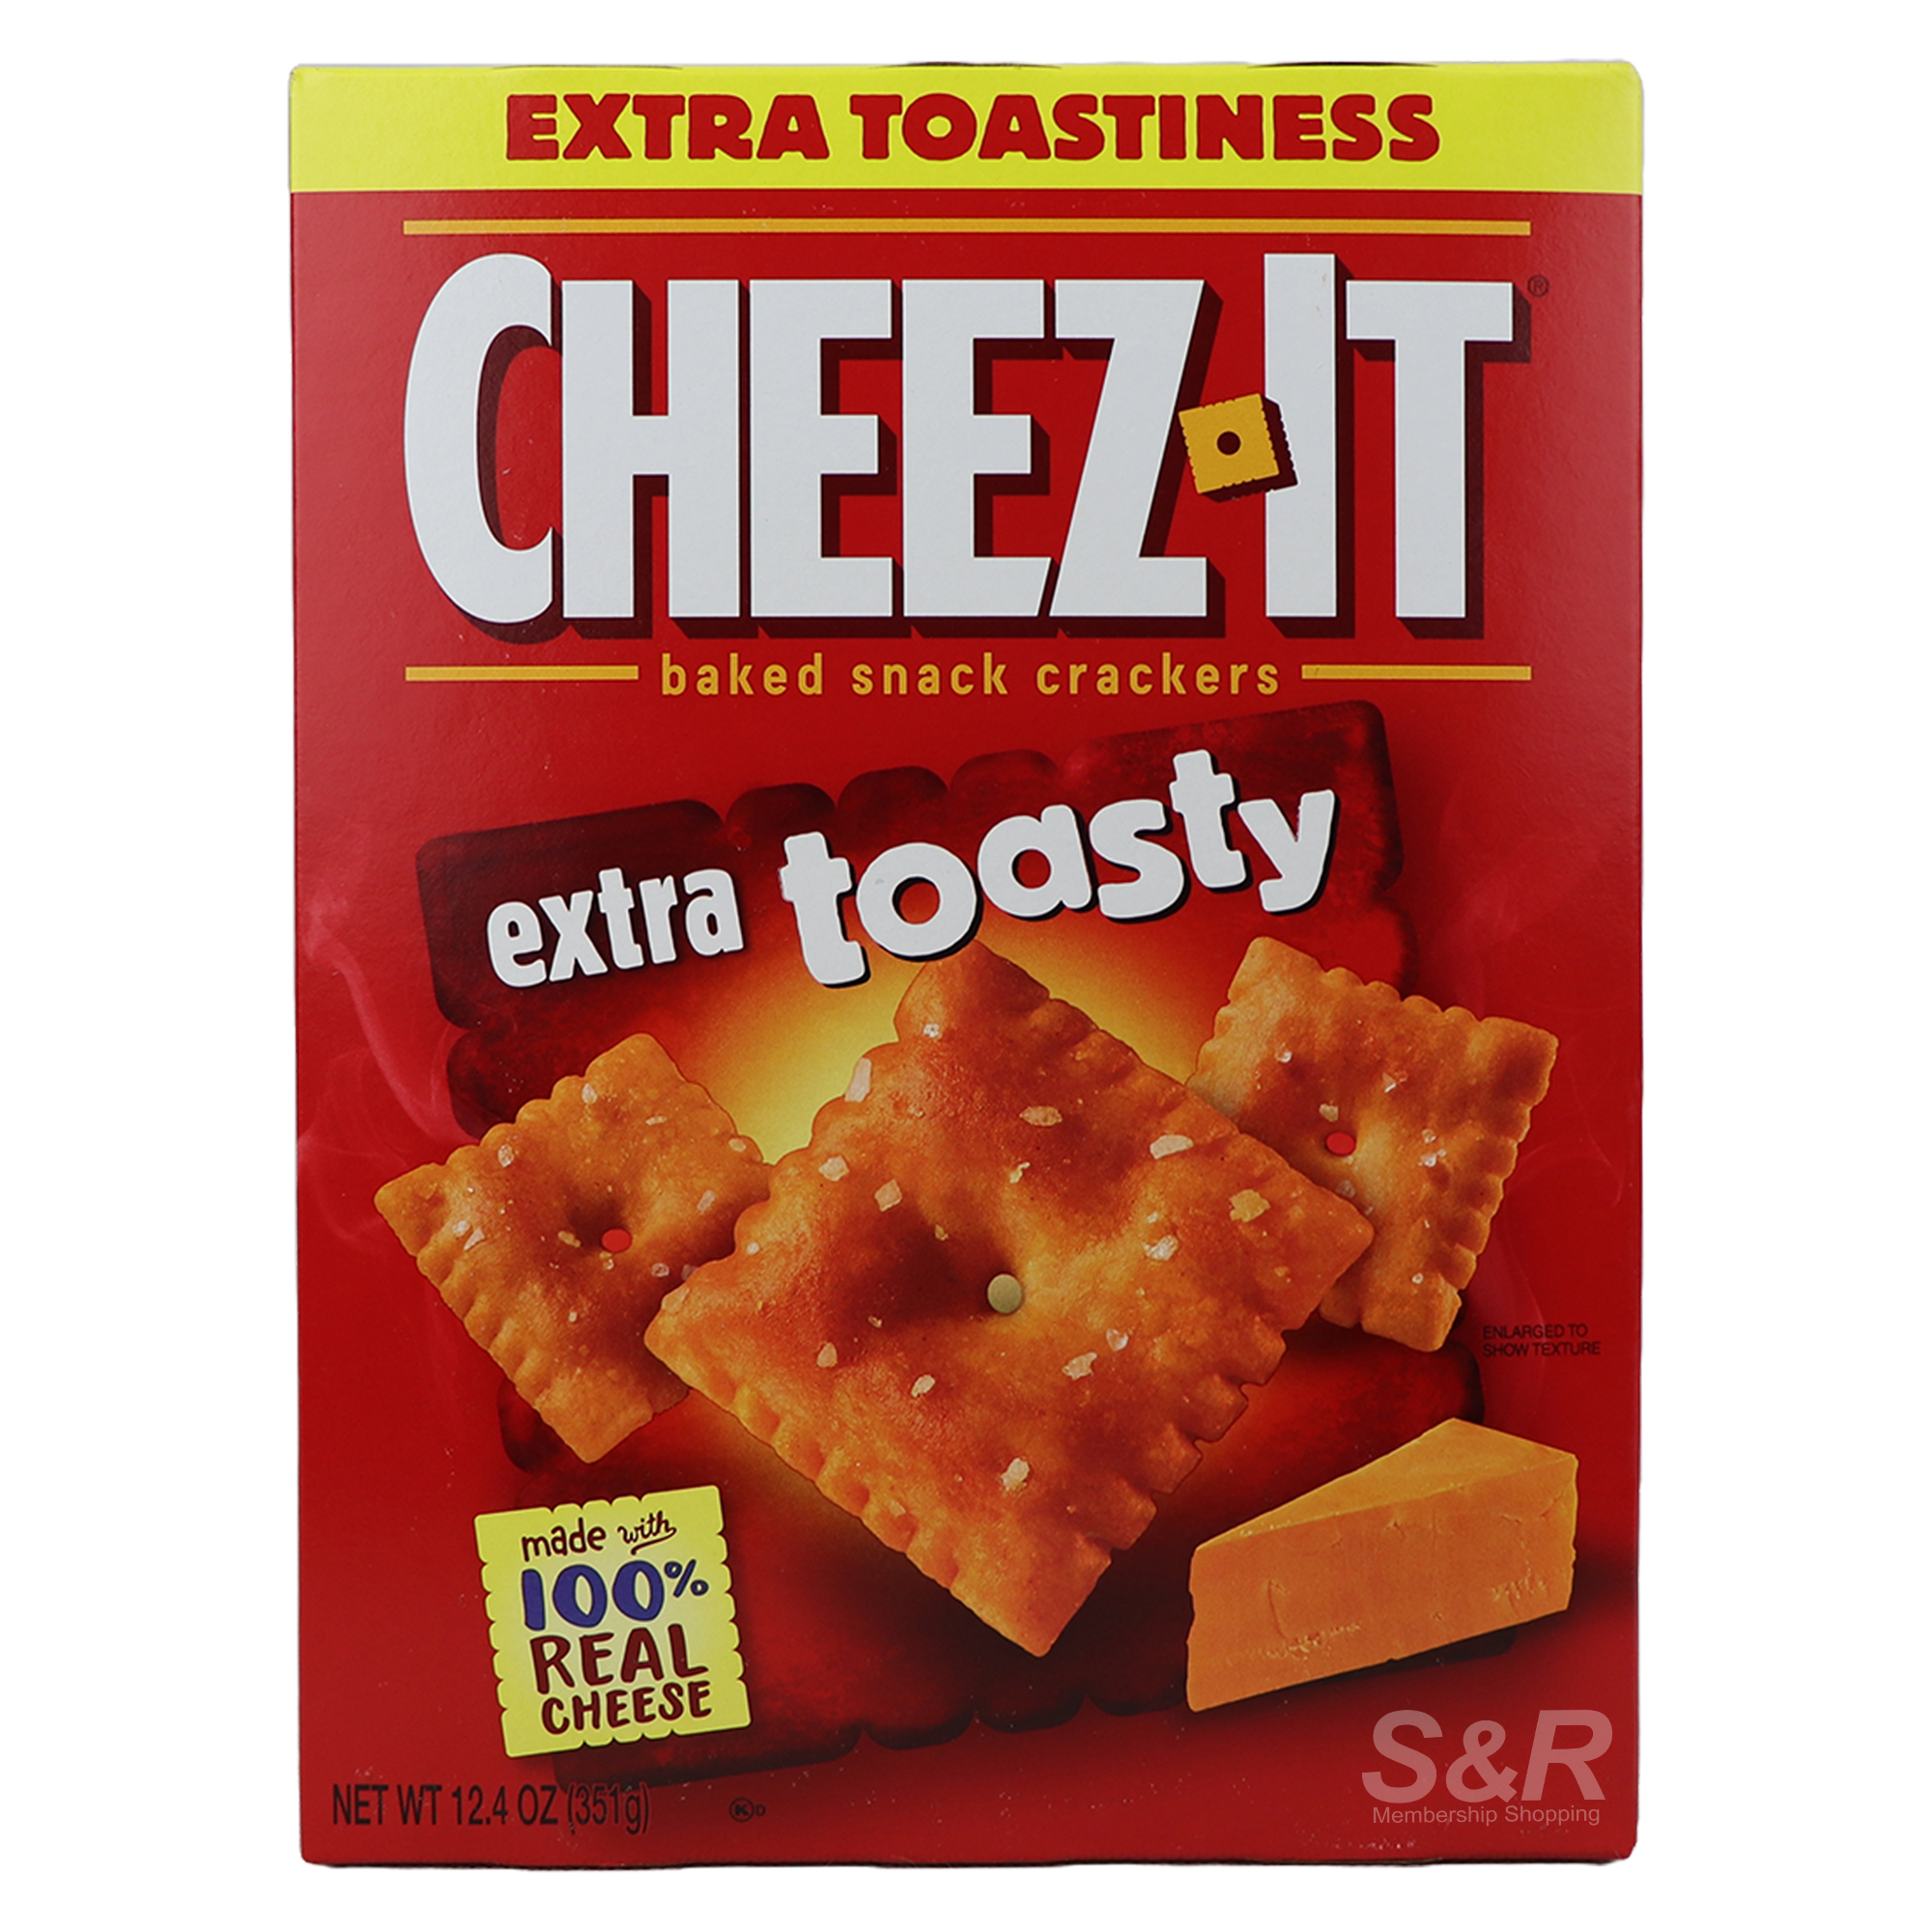 Cheez It Extra Toasted Baked Snack Crackers 351g